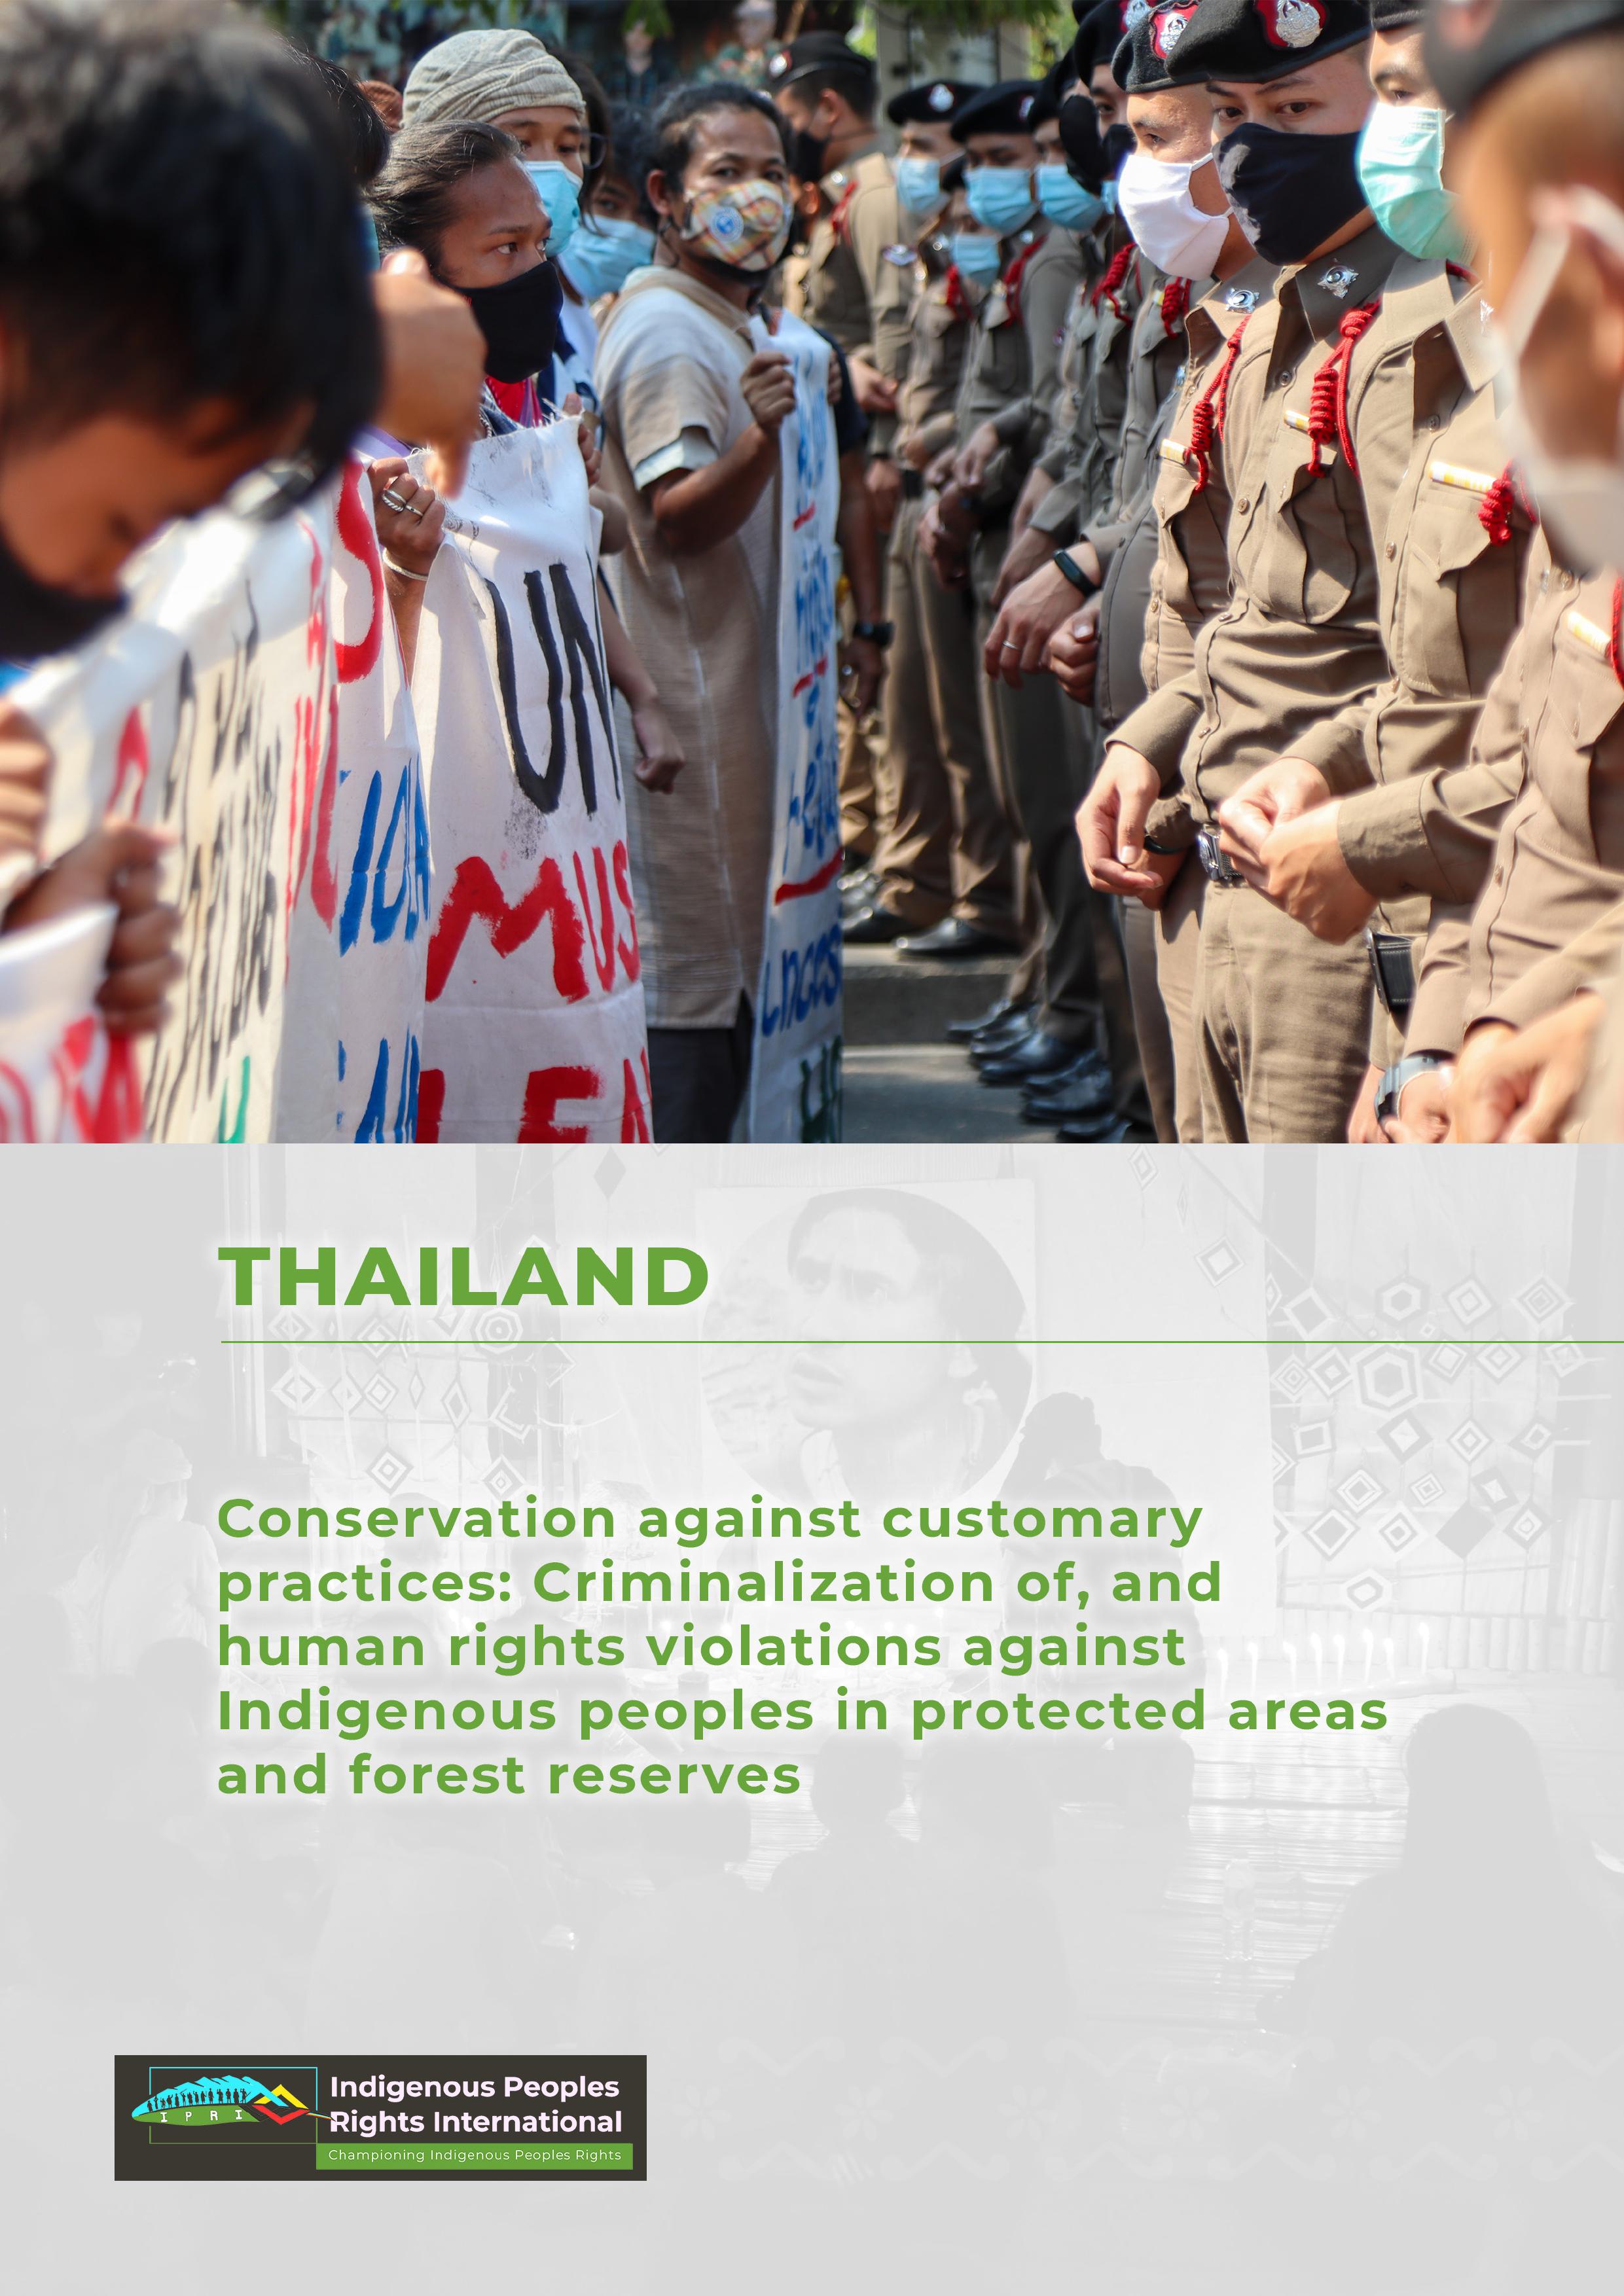 THAILAND || Conservation against customary practices Criminalization of, and human rights violations against Indigenous peoples in Thailand’s protected areas and forest reserves